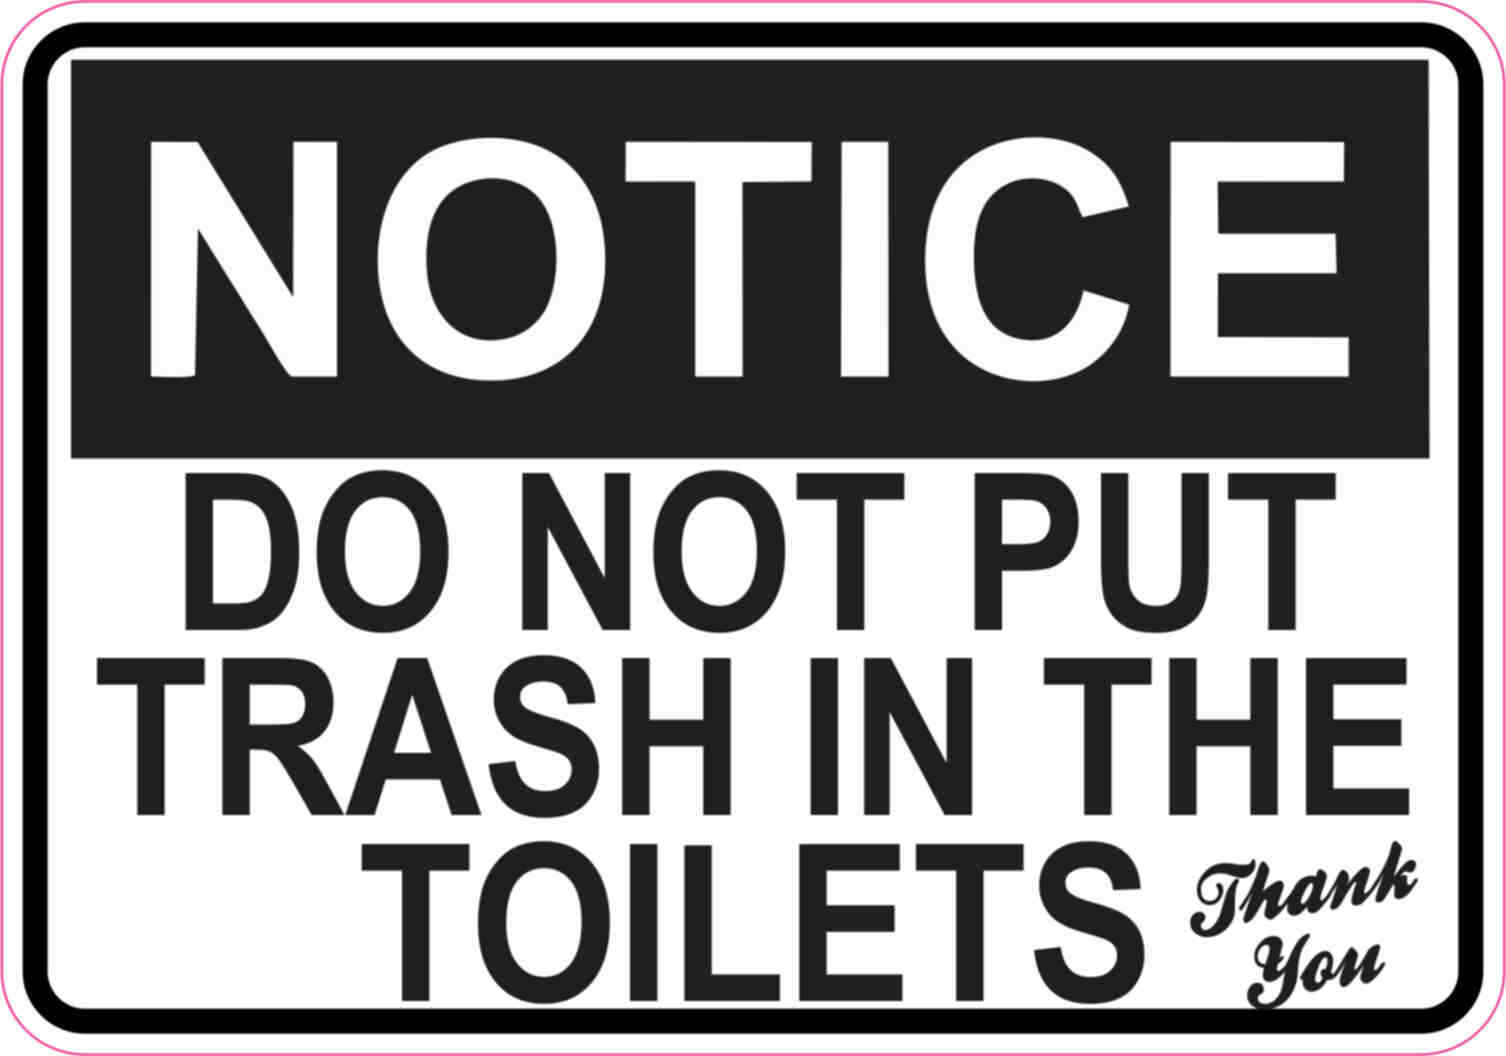 5 x 3.5 Do Not Put Trash In The Toilets Sticker Vinyl Sign Stickers Wall Signs